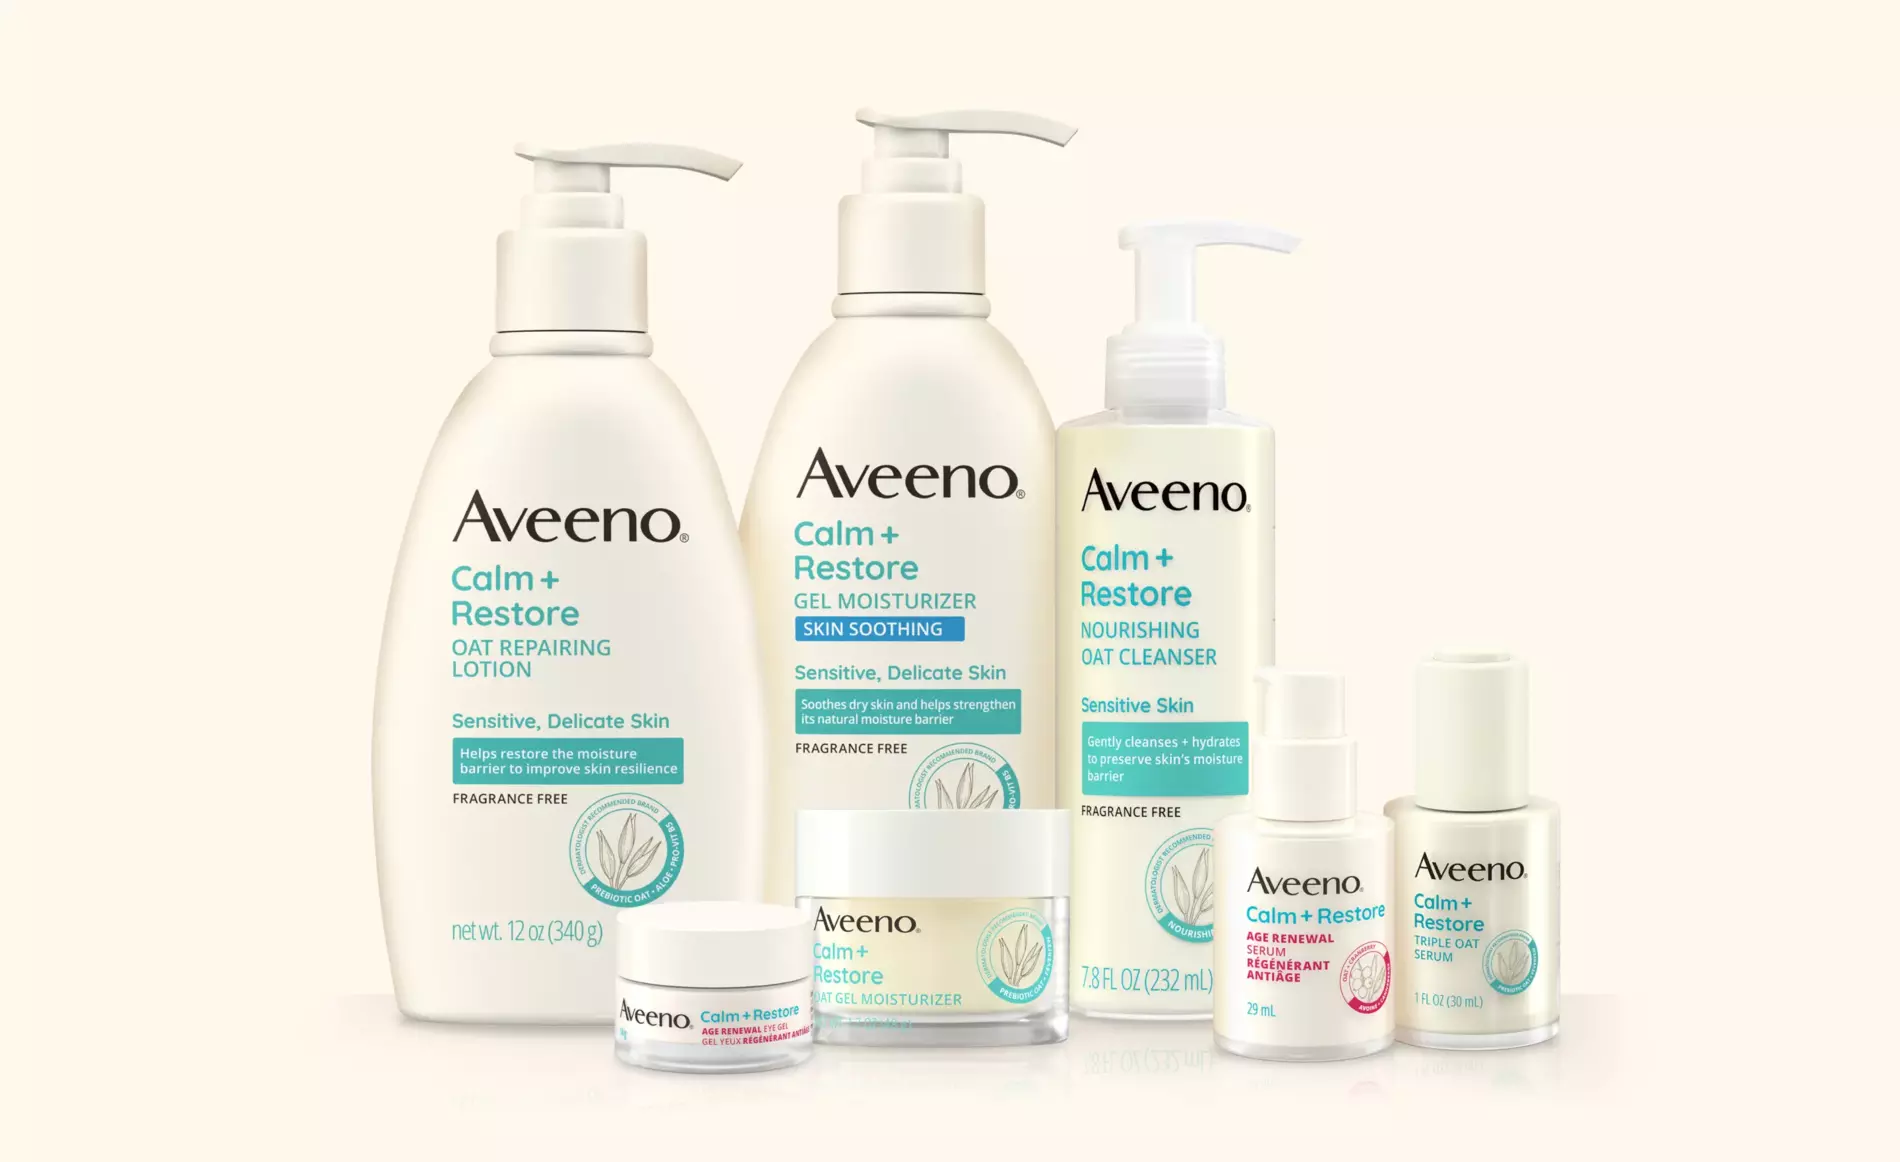 Seven skincare products representing the Aveeno® Calm + Restore® product collection